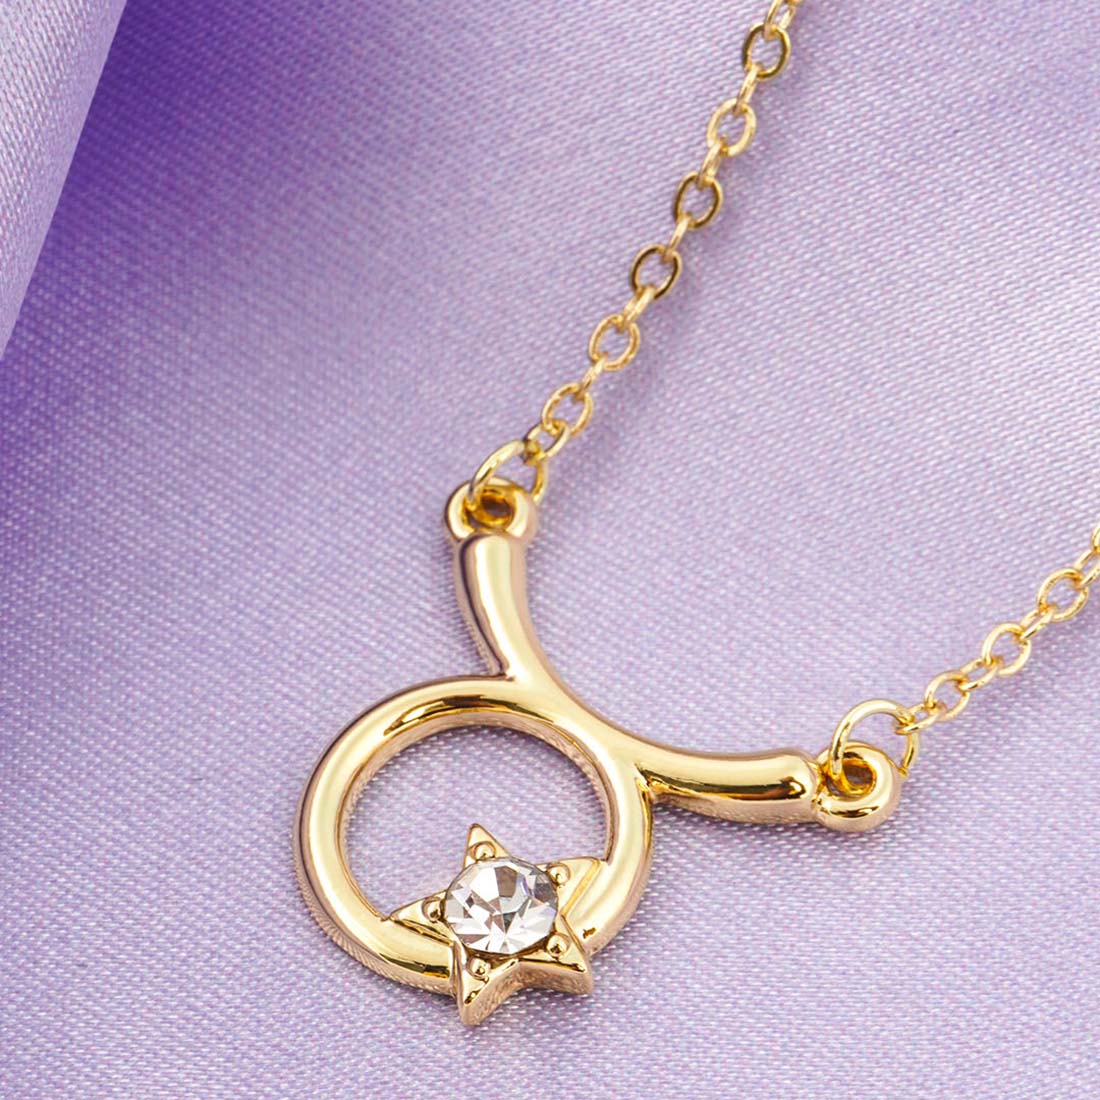 Women Gold-Toned & Stone-Studded Crystal Star Taurus Pendant With Chain